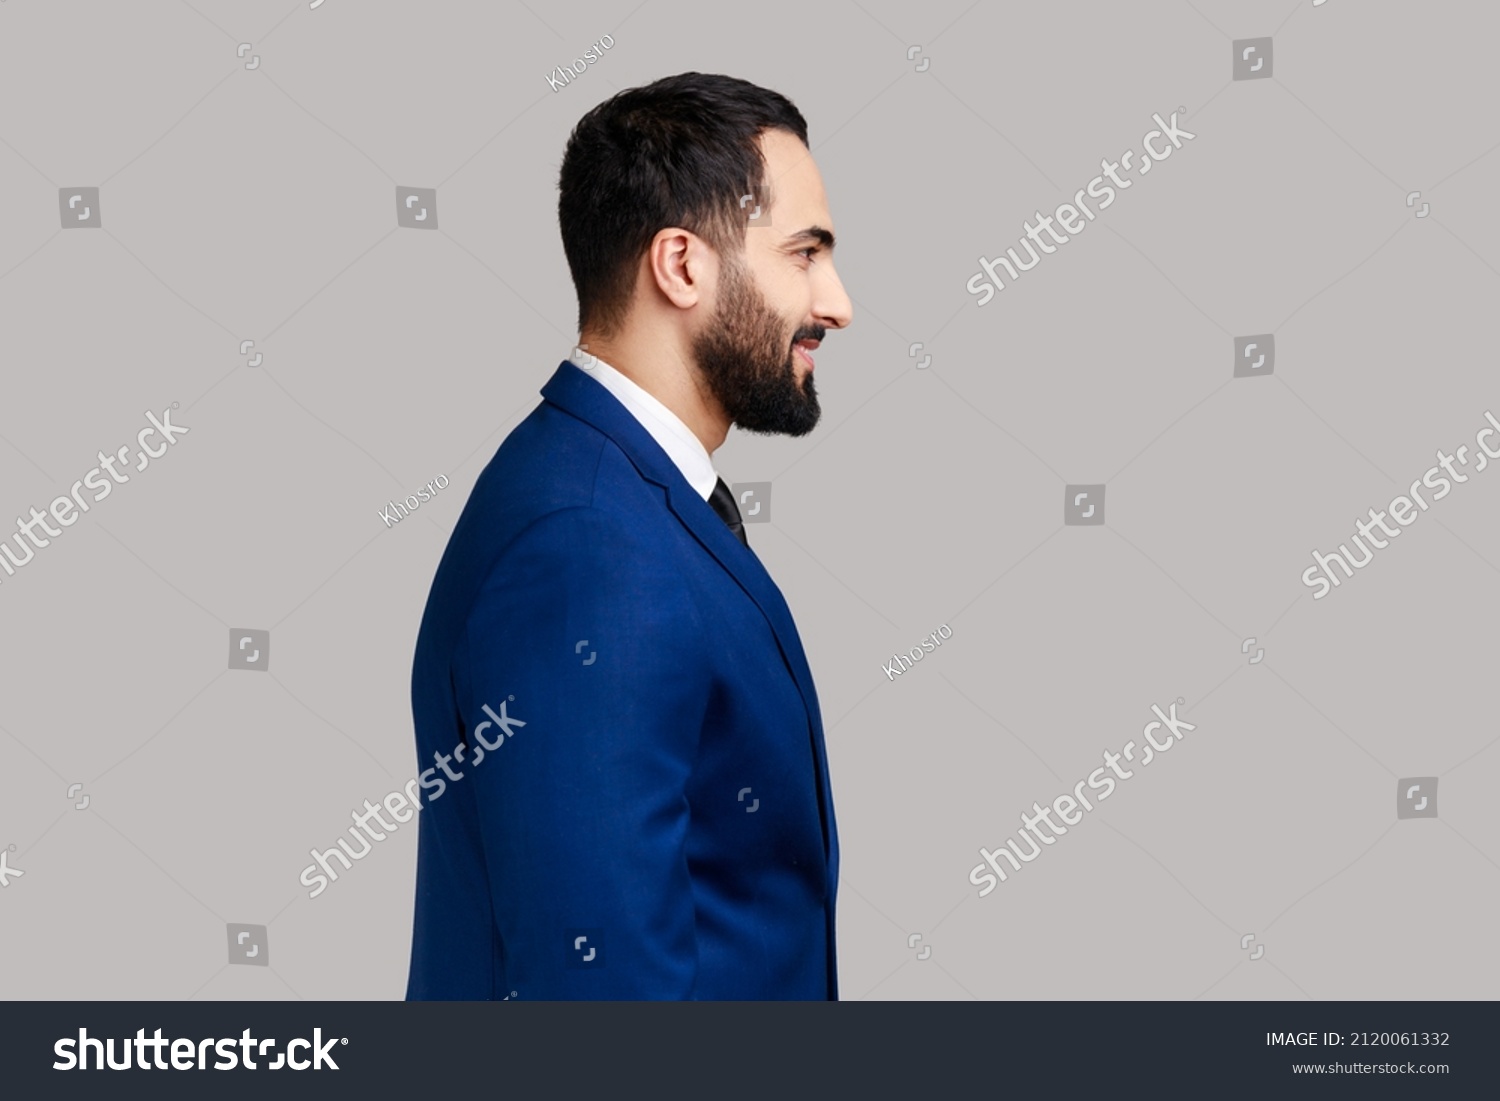 Side view portrait of cheerful bearded man with smile, standing and looking at camera, expressing positive emotions, wearing official style suit. Indoor studio shot isolated on gray background. #2120061332